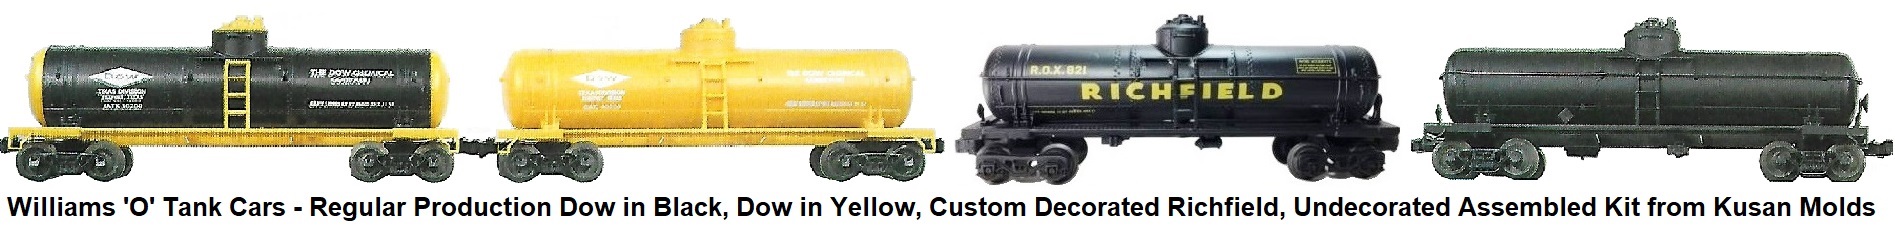 Williams 'O' gauge Tank Cars - Dow in Black, Dow in Yellow, Custom Decorated Richfield, and undecorated assembled kit from Kusan molds